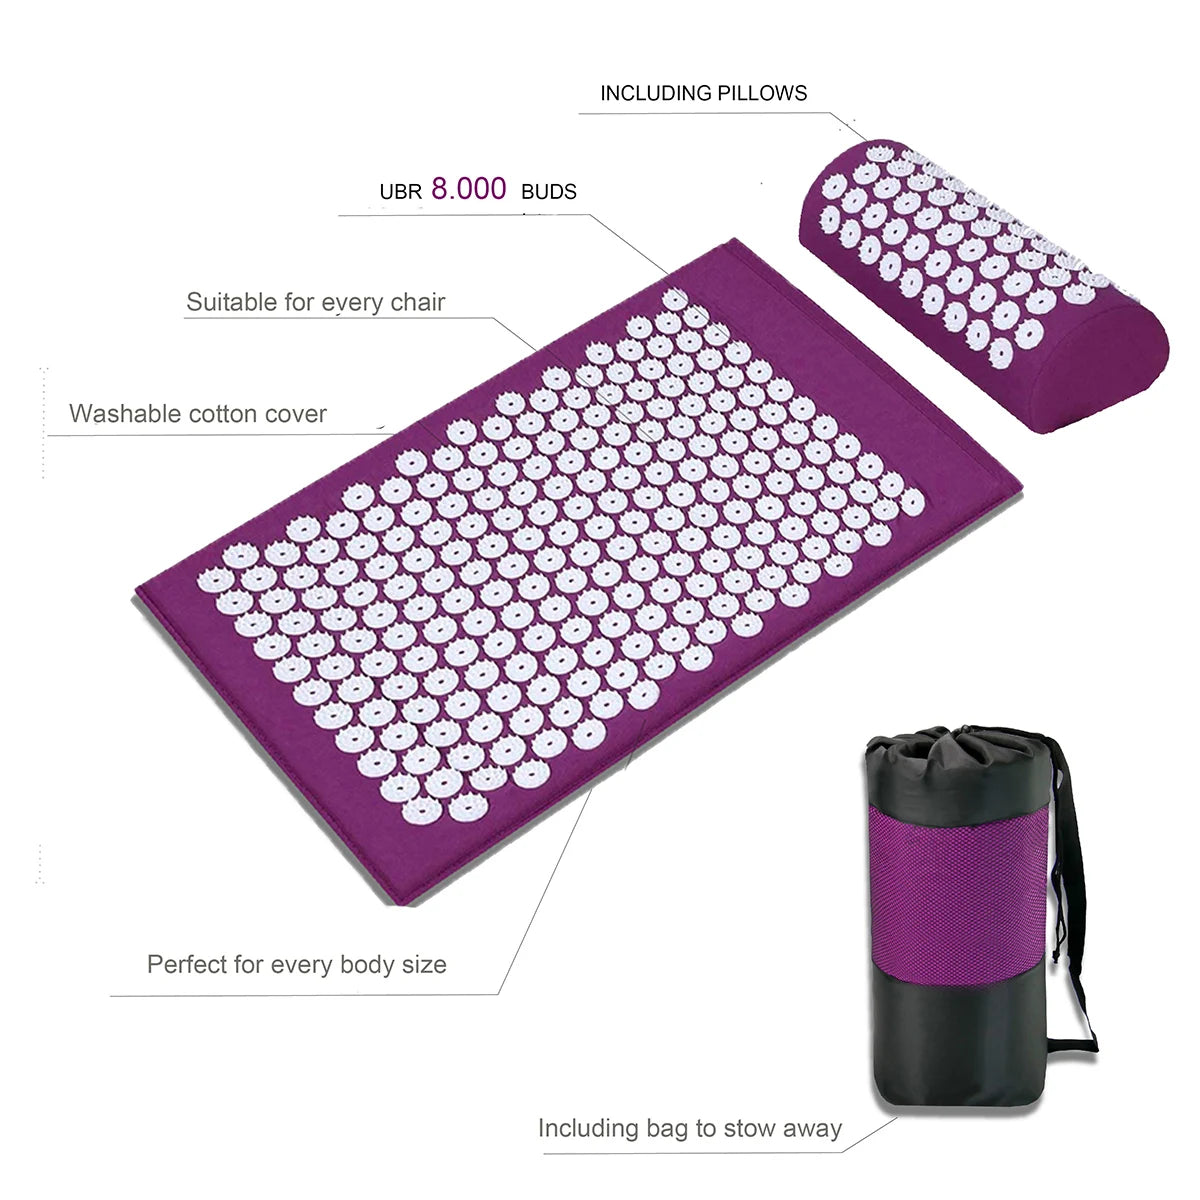 Acupressure Mat for Body Massage Relieve Stress, Back Pain Spike Cushion Yoga  Acupuncture